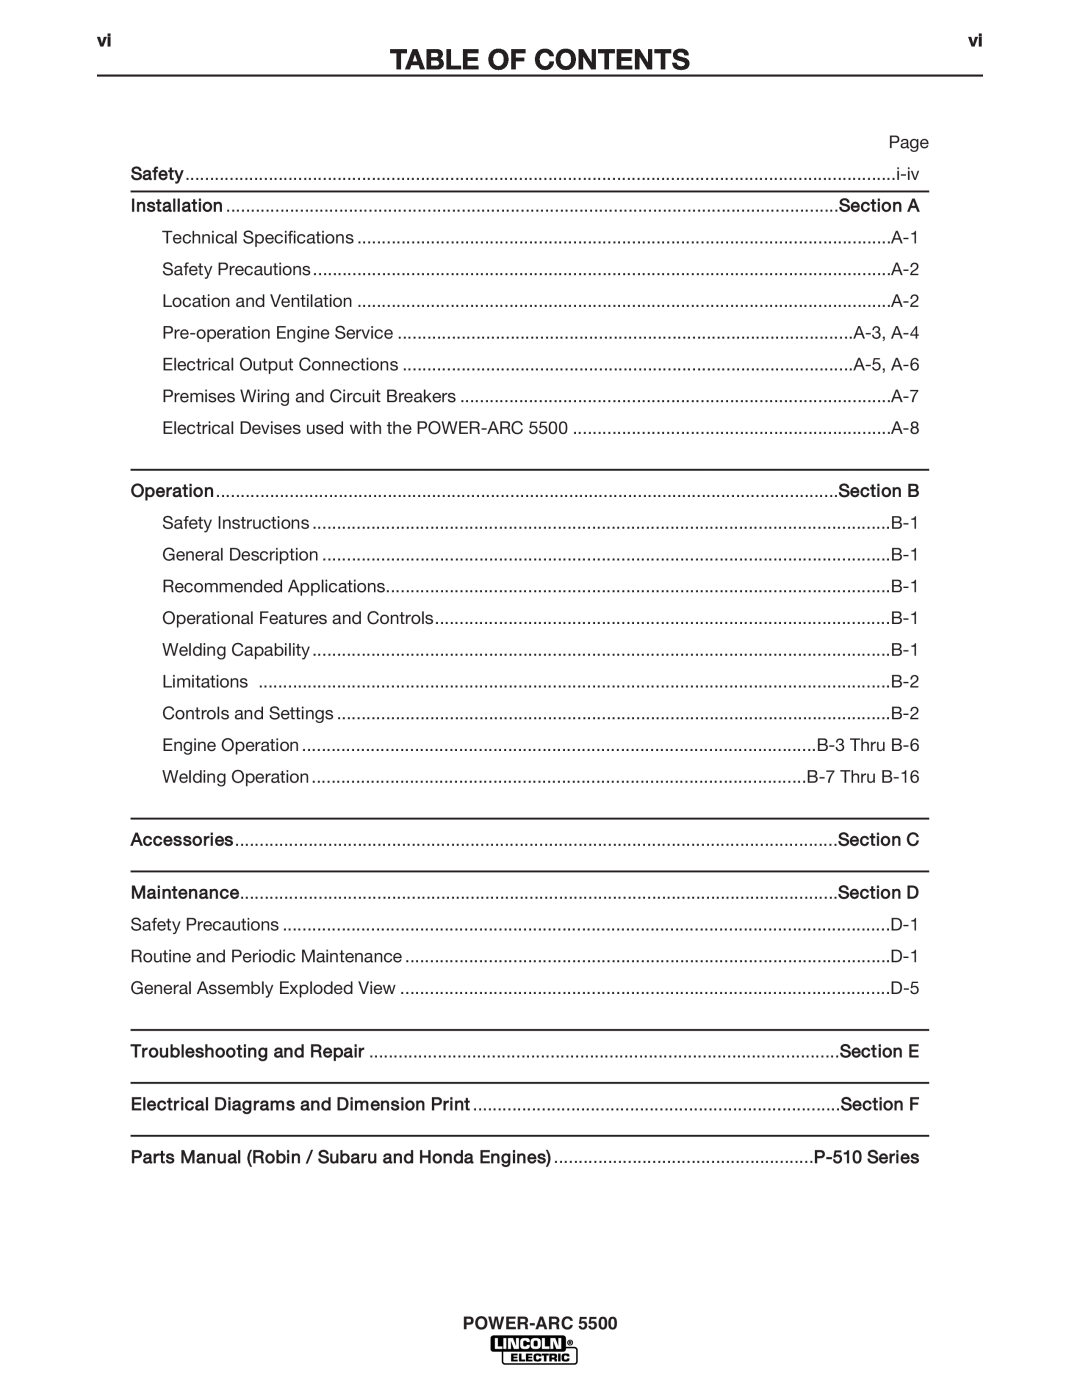 Lincoln Electric IM871-A manual POWER-ARC5500, Table Of Contents, Section A, Section B, Section C, Section D, Section E 